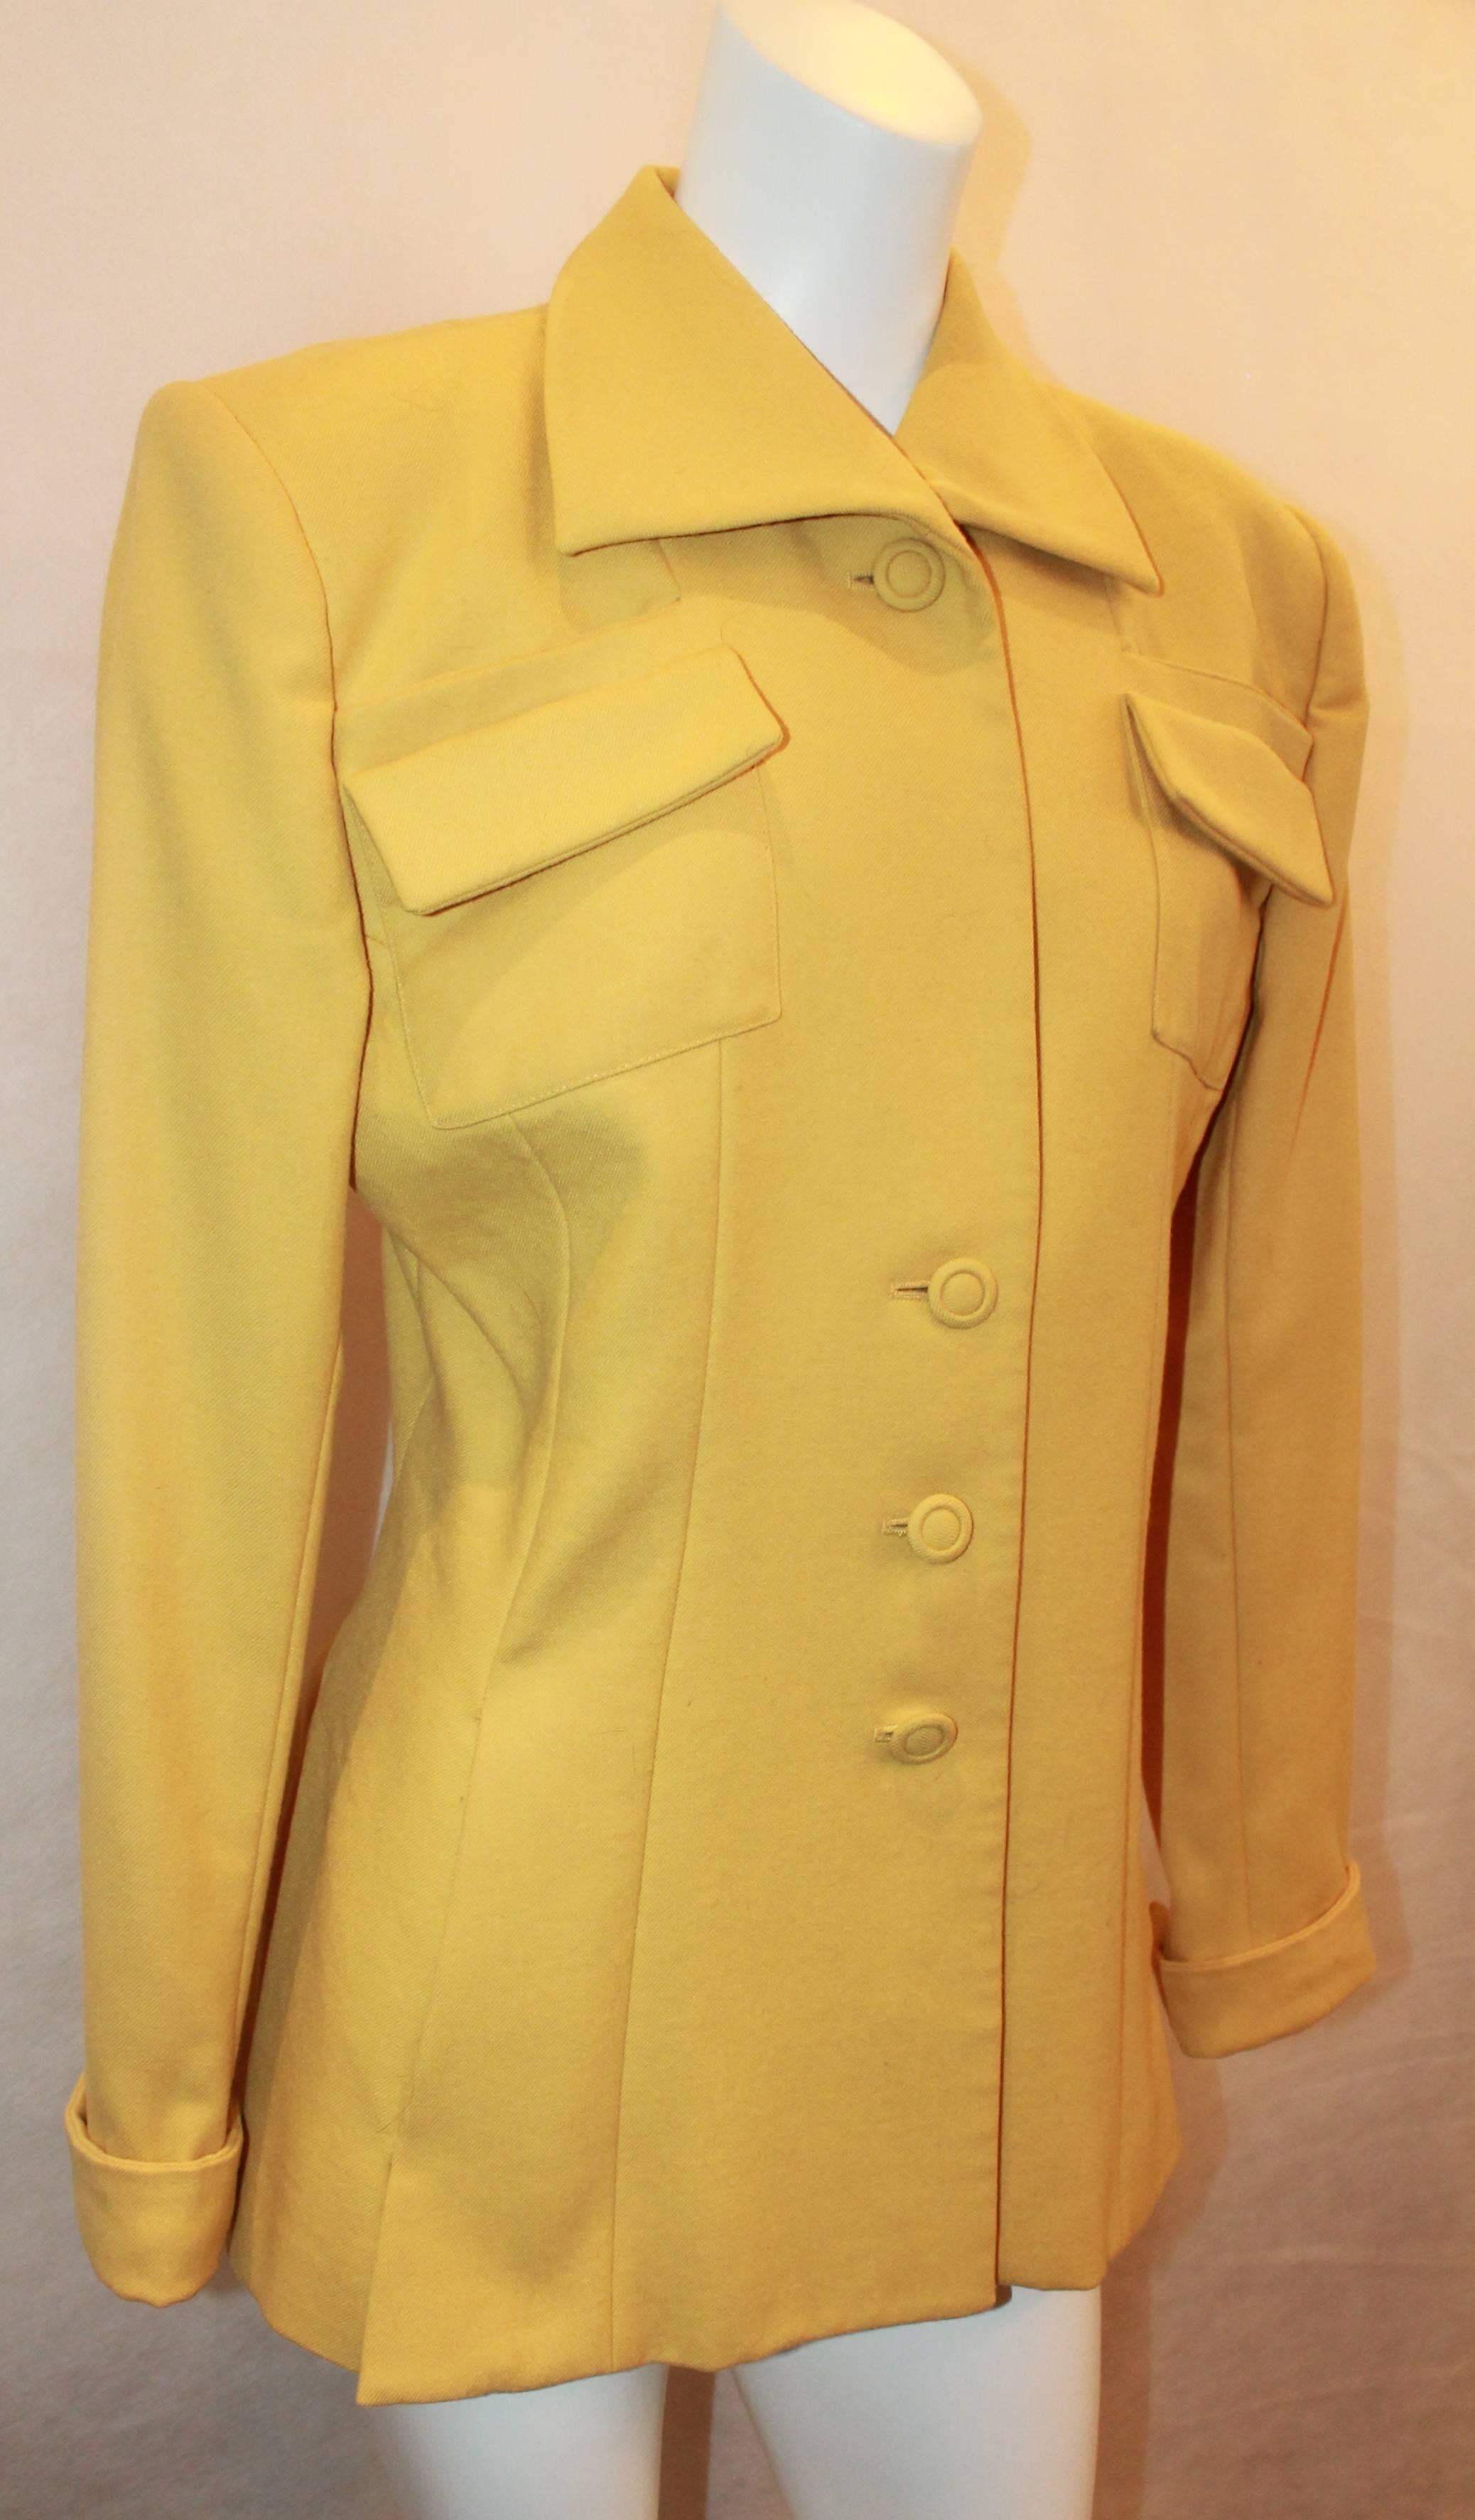 Norma Kamali 1980's Vintage Mustard Wool Jacket - 10. This jacket is in good vintage condition with some general wear all over. The jacket has 2 front pockets towards the top and 3 circular buttons. It also has shoulder pads.